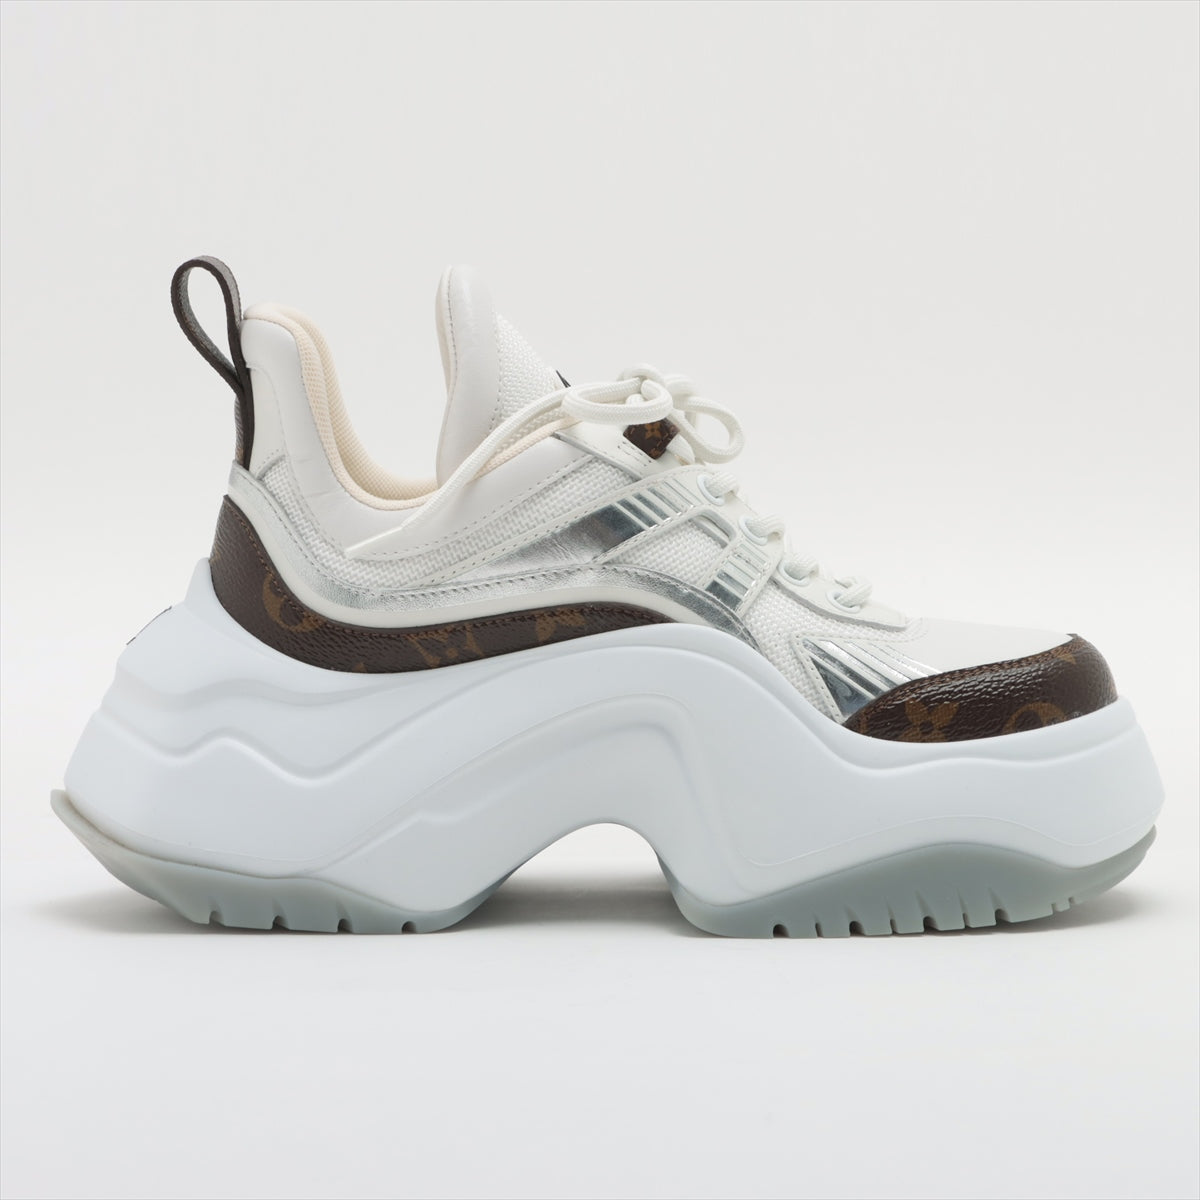 Louis Vuitton 23 years Leather x mesh Sneakers 34 1/2 Ladies' White x brown Arclight 2.0 line GO0213 Monogram box There is a bag